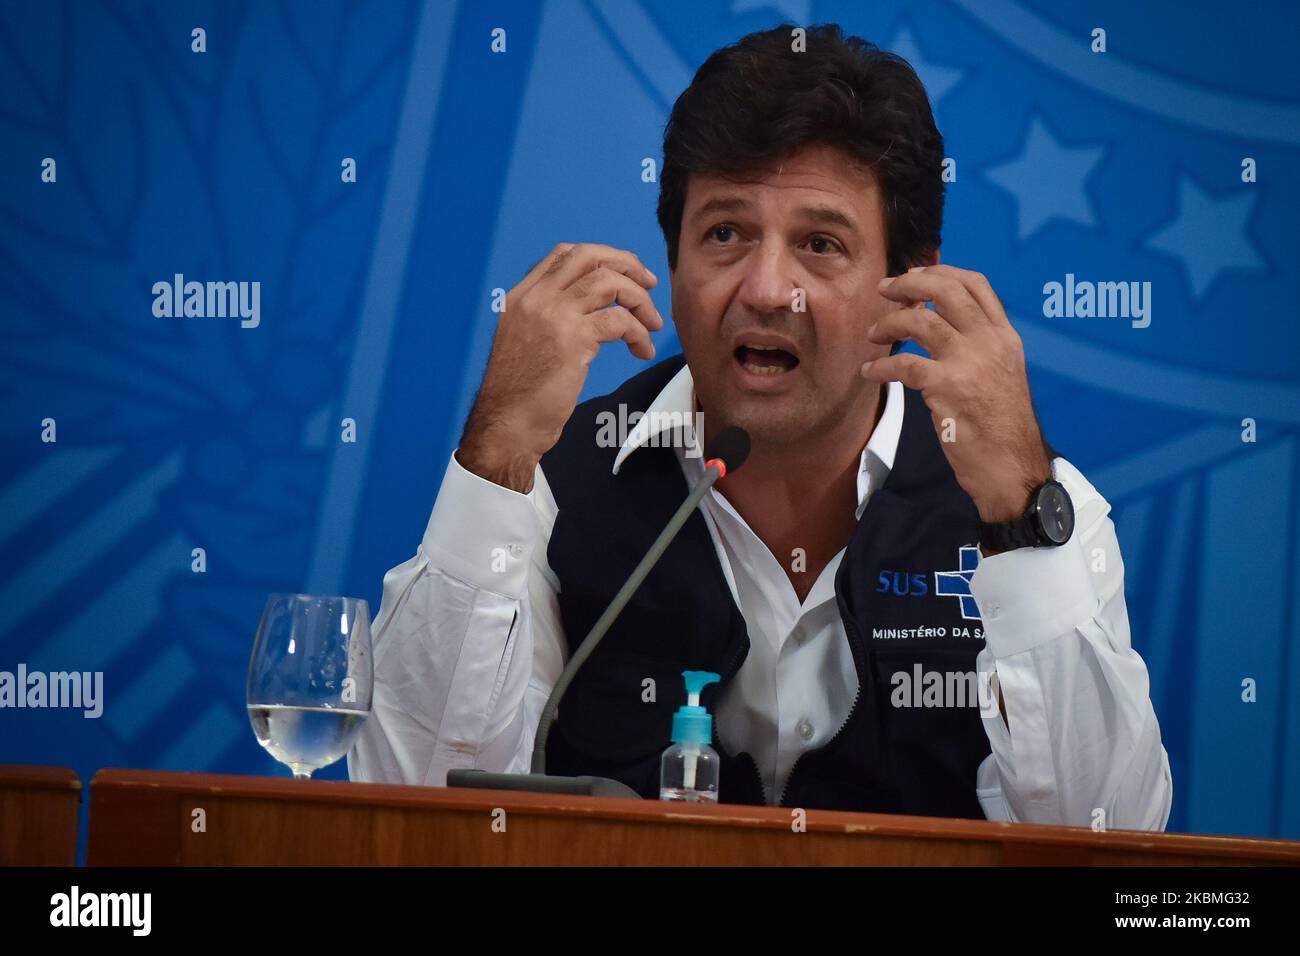 After reports that would leave office leave office, Brazil's Minister of Health Luiz Henrique Mandetta reacts during a press conference, amid the coronavirus disease (COVID-19) outbreak at the Planalto Palace in Brasilia, Brazil April 15, 2020. (Photo by Andre Borges/NurPhoto) Stock Photo